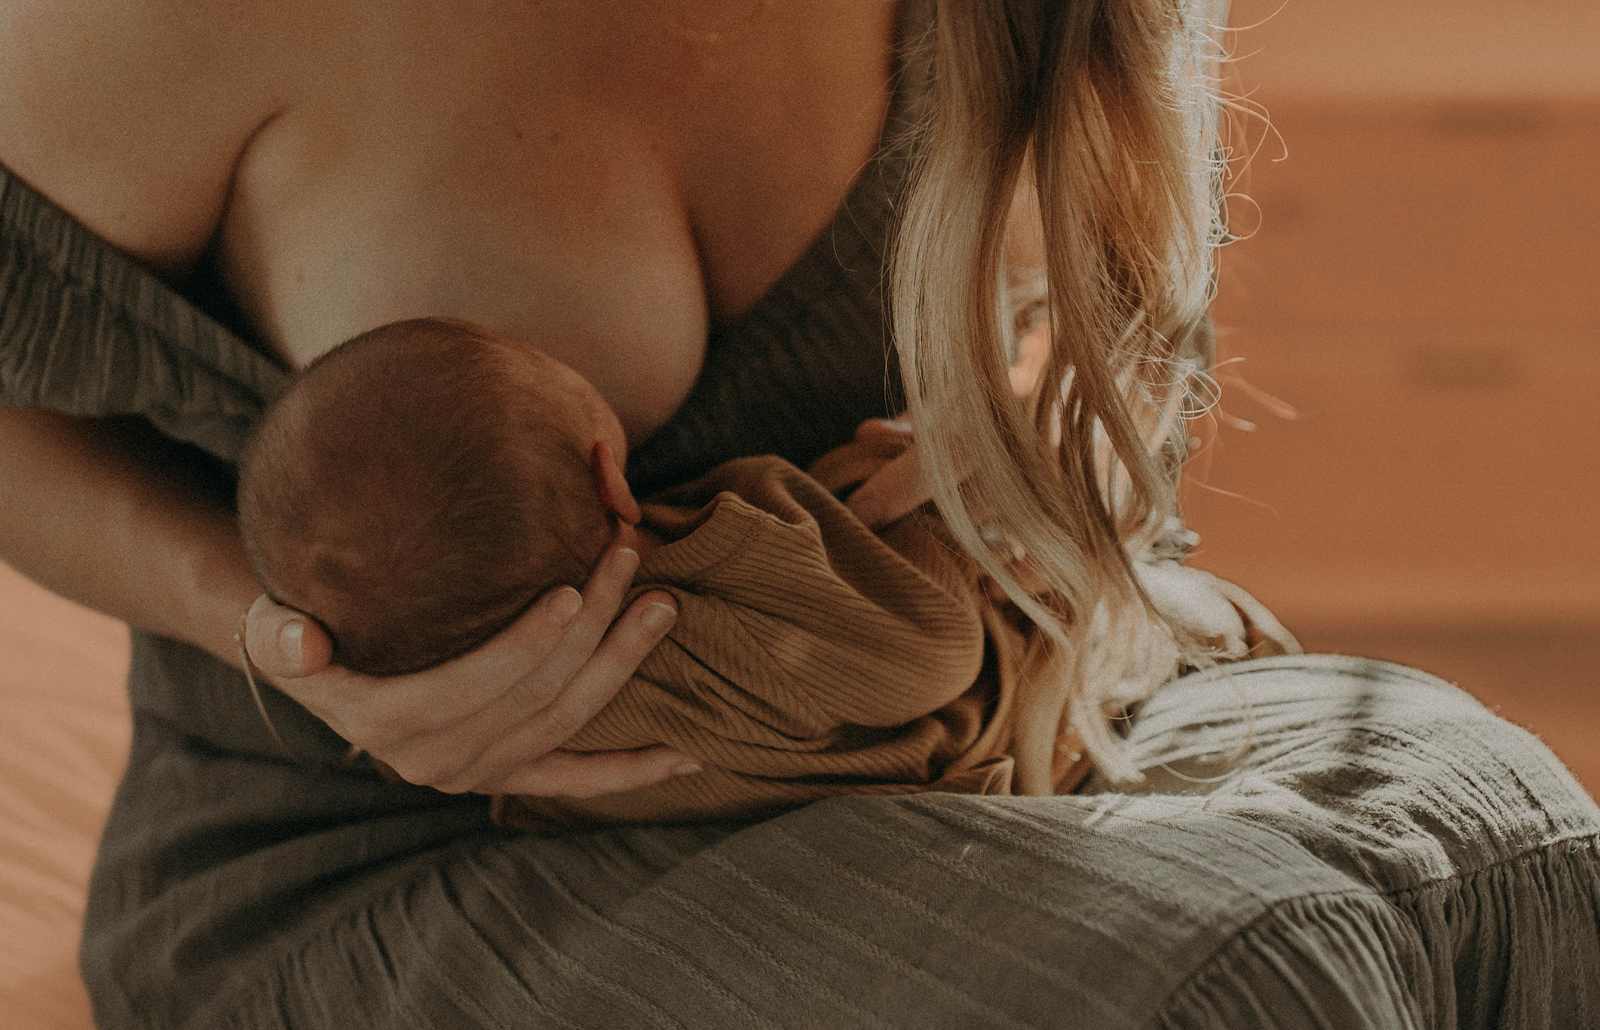 So I stopped breastfeeding and ever since my boobs are saggy, deflated,  lopsided and I don't have any cleavage anymore really I just have  sagginess. Will they be like this forever 😭